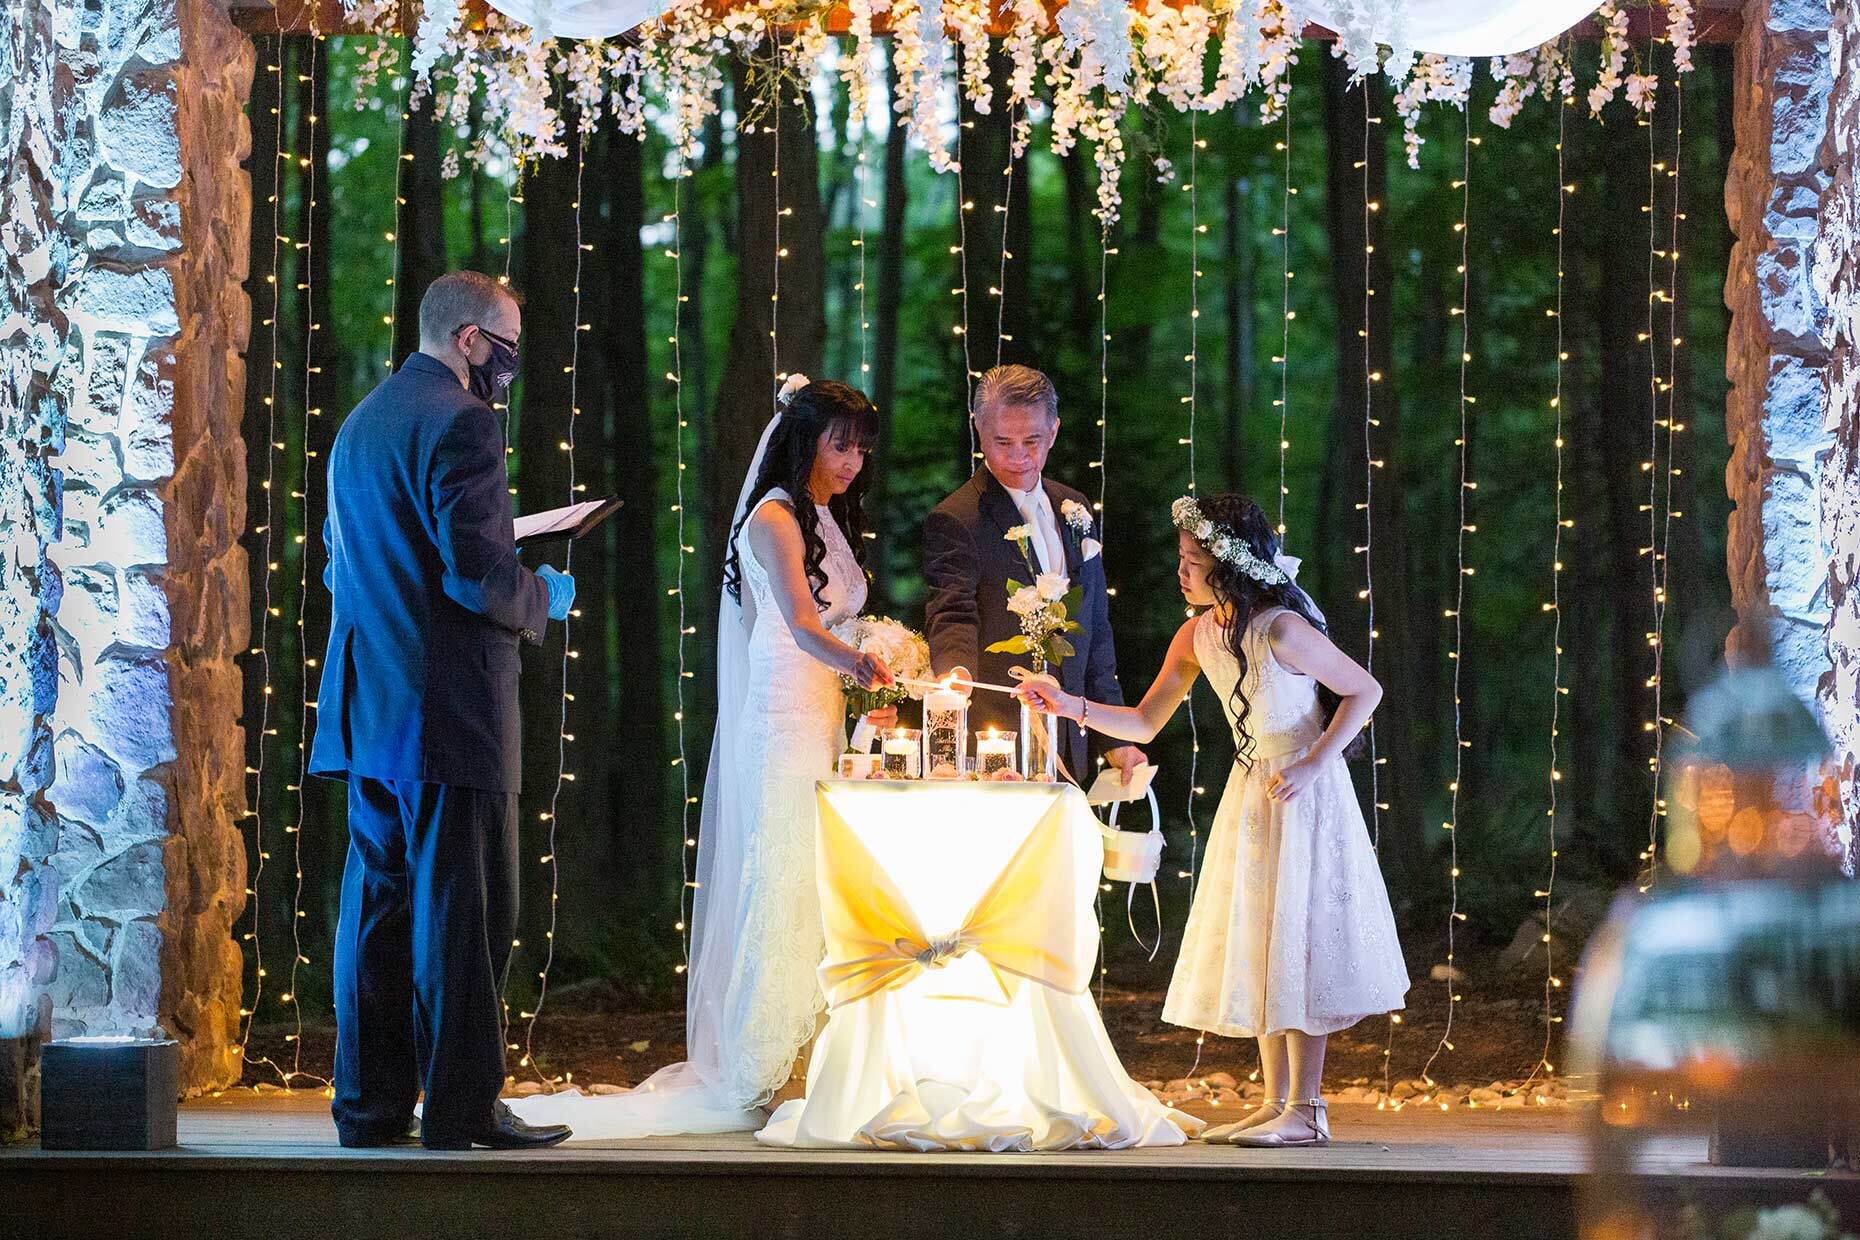 Family Lighting Unity candle at vow renewal